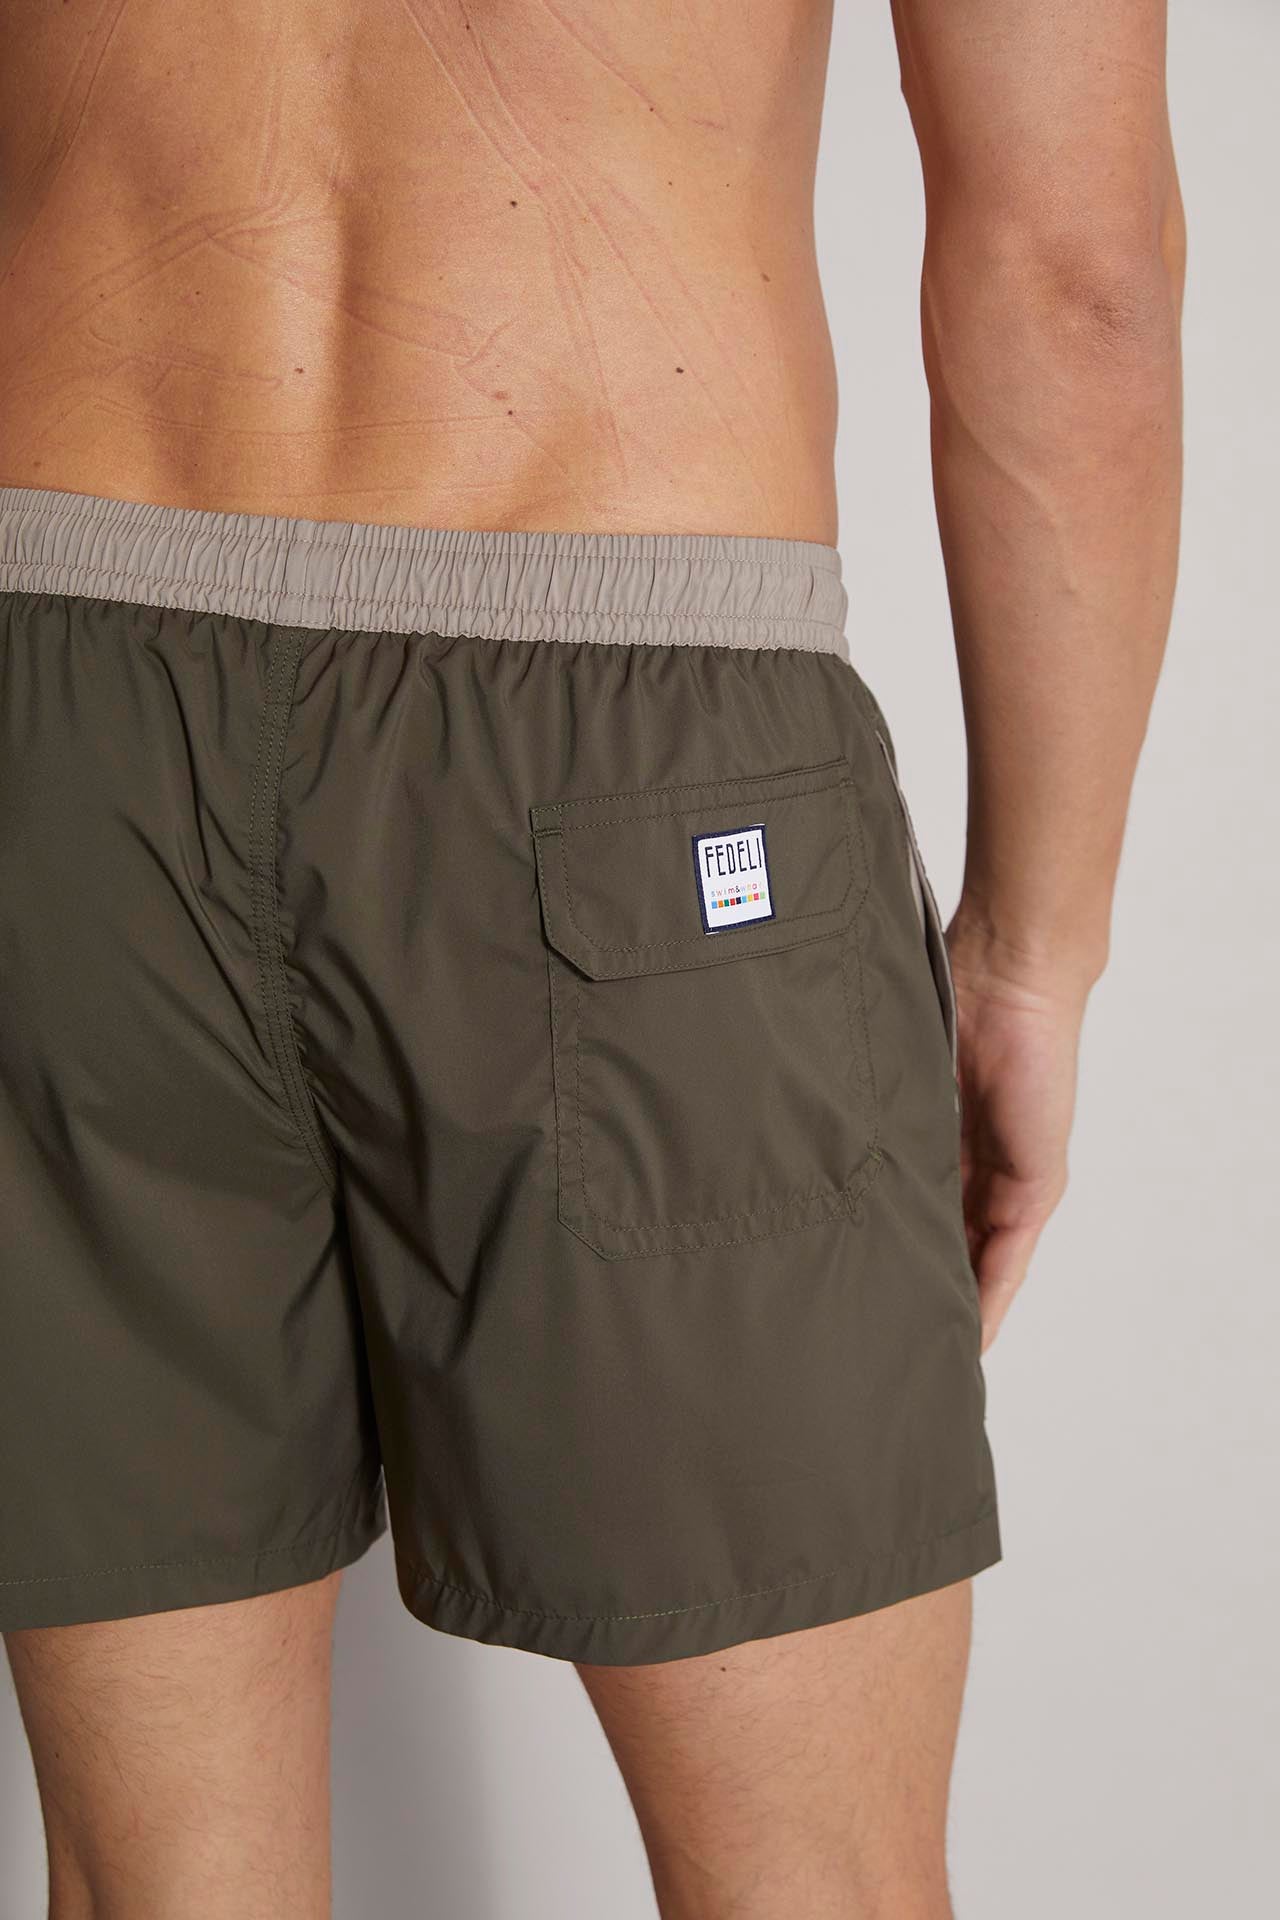 Tahiti Airstop swim trunk with color contrast